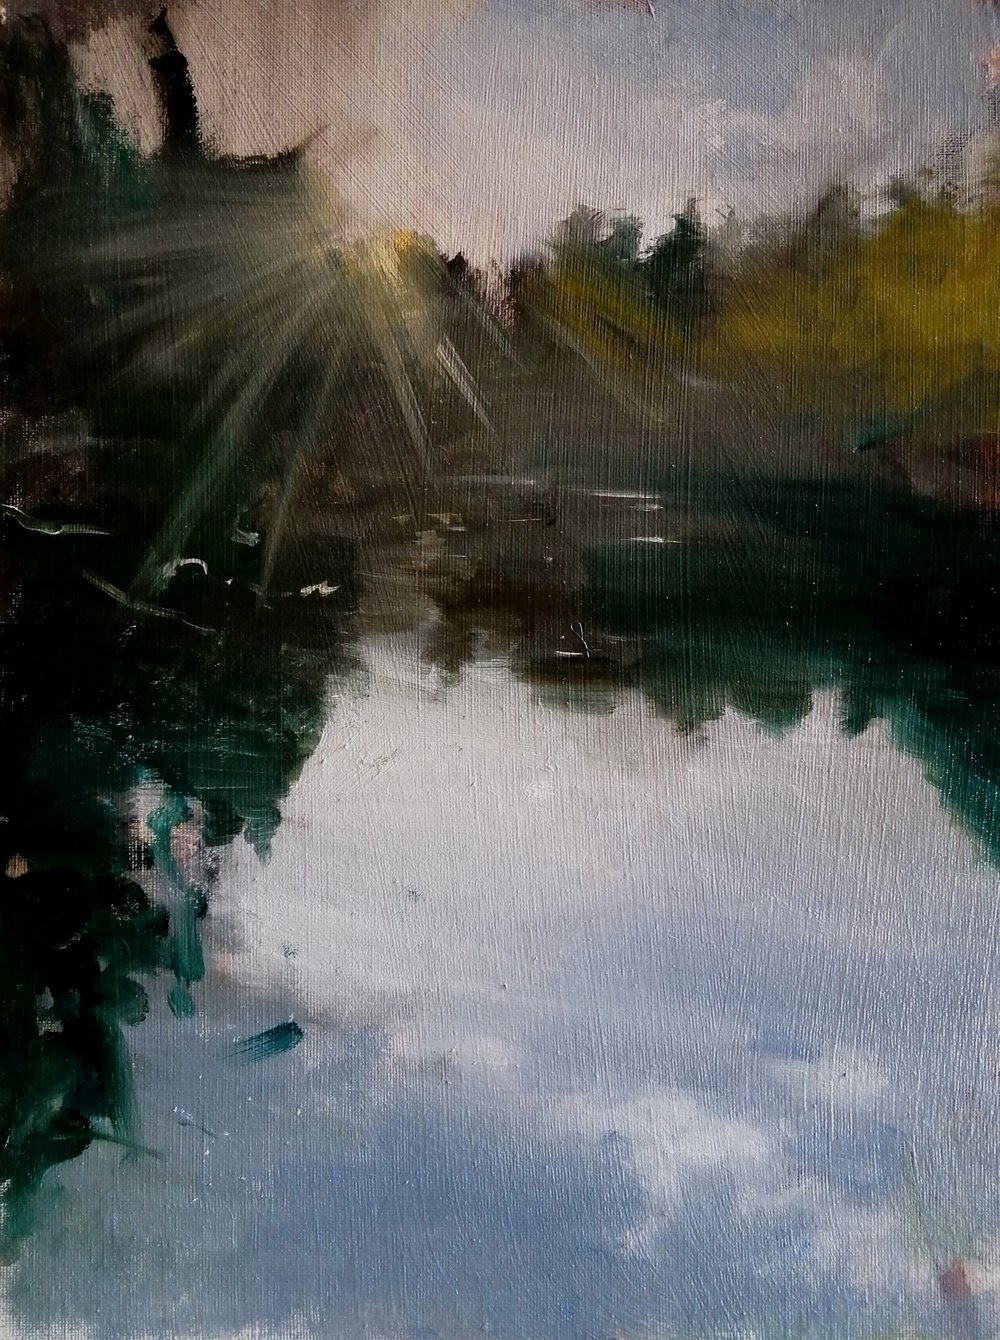  Sunrays  Oil on board  39x49cm  £400  Sunrays and reflections in a lake. 